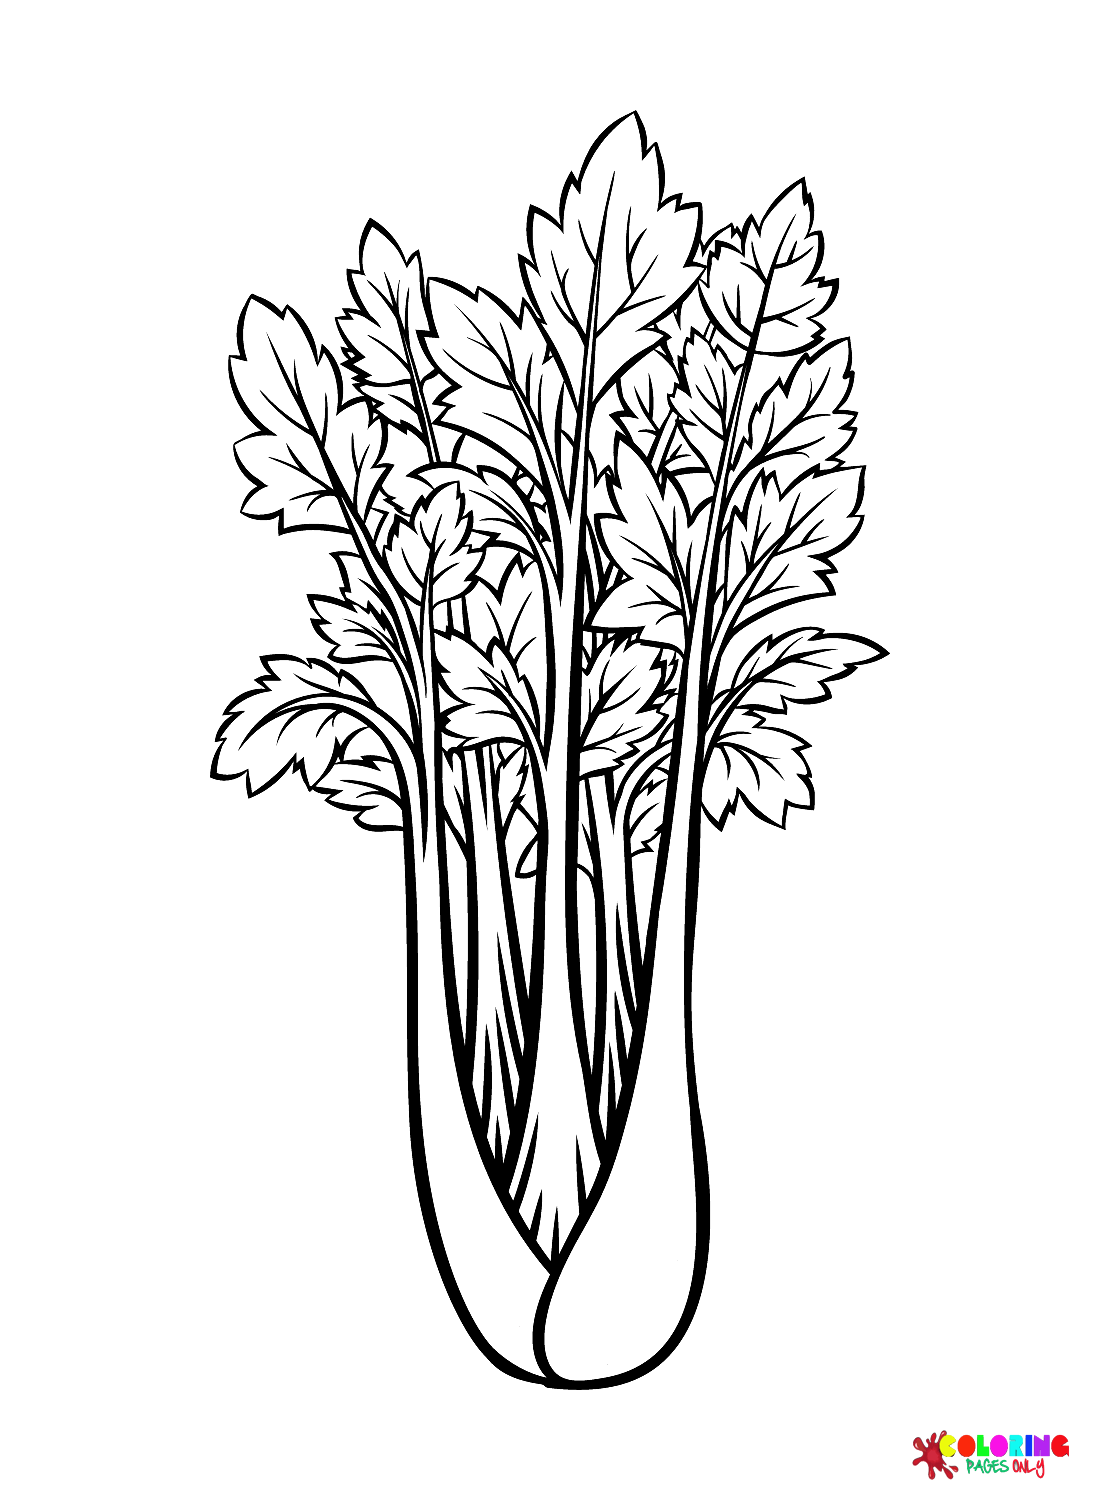 Celery Pictures Coloring Page - Free Printable Coloring Pages